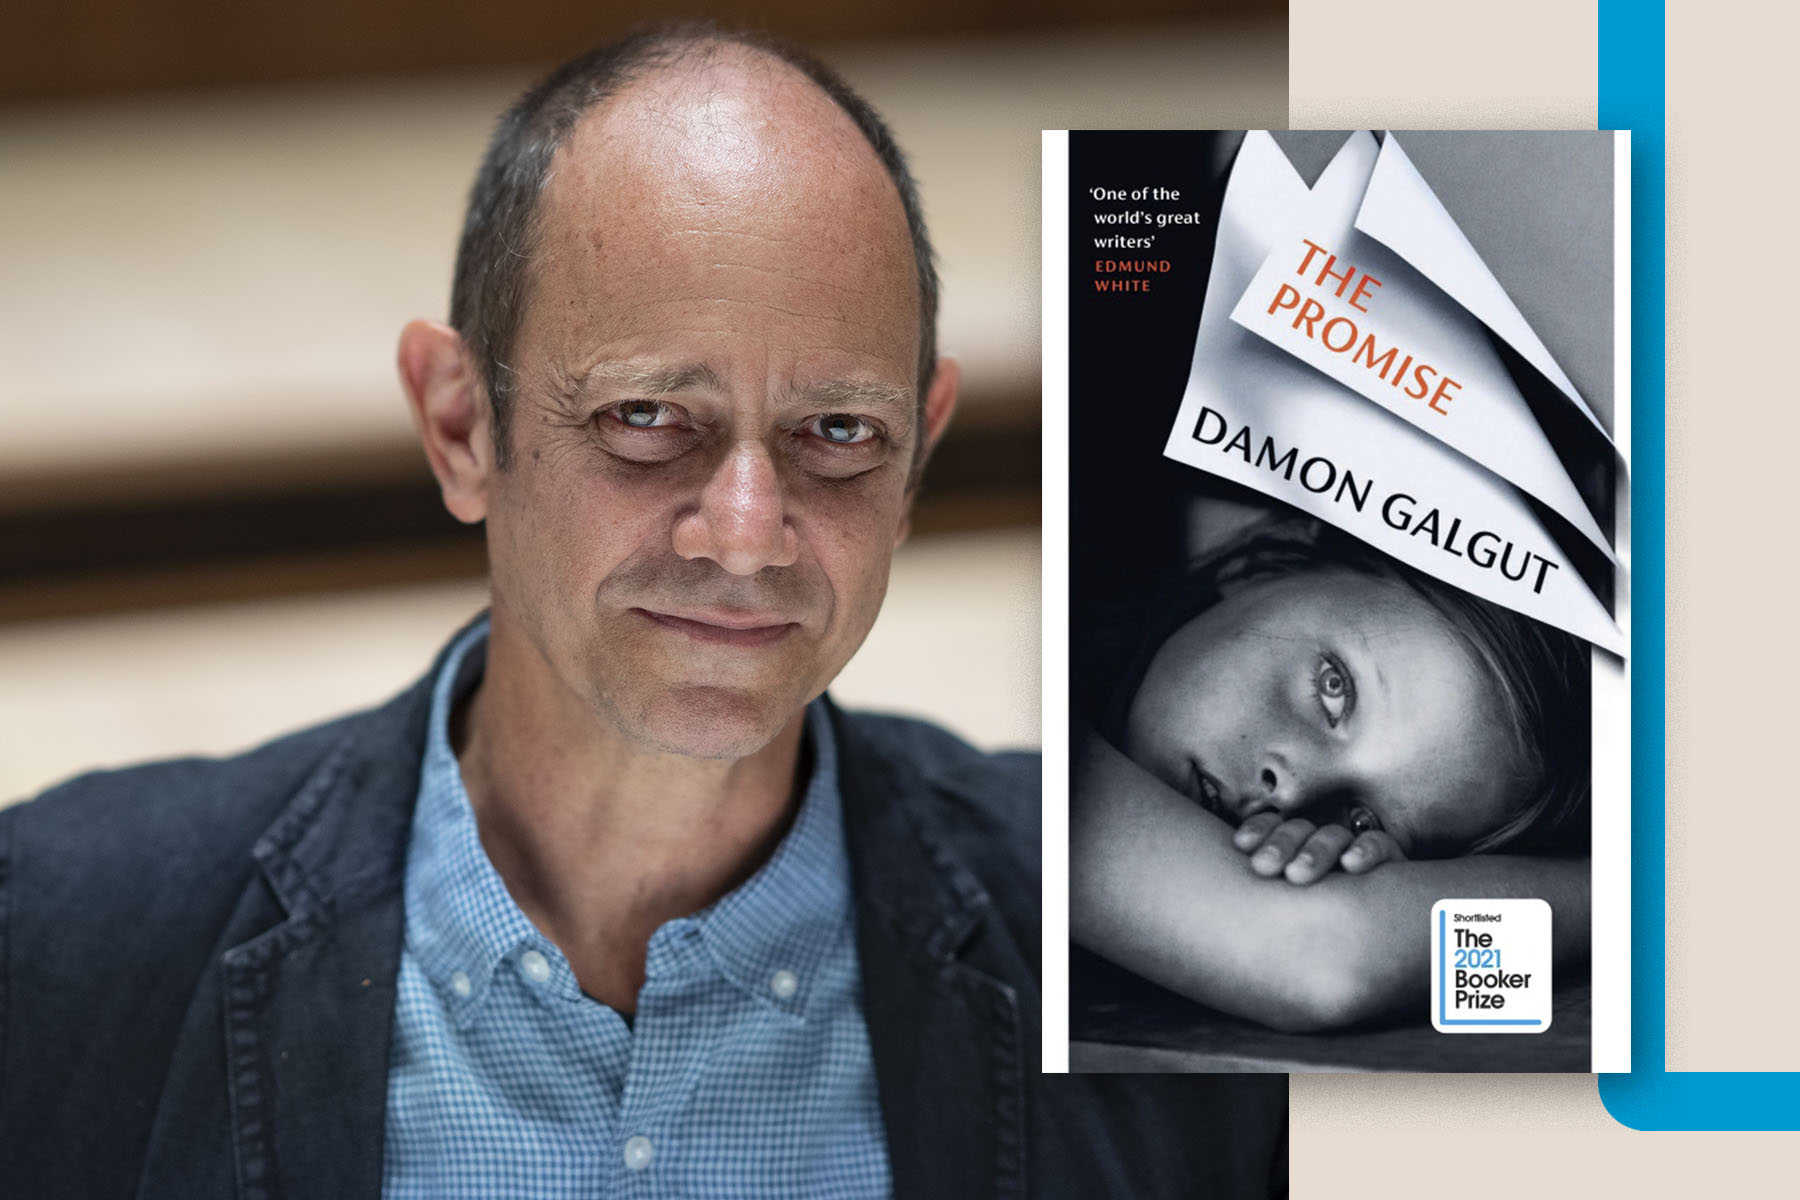 A photograph of Damon Galgut side-by-side with the cover of The Promise